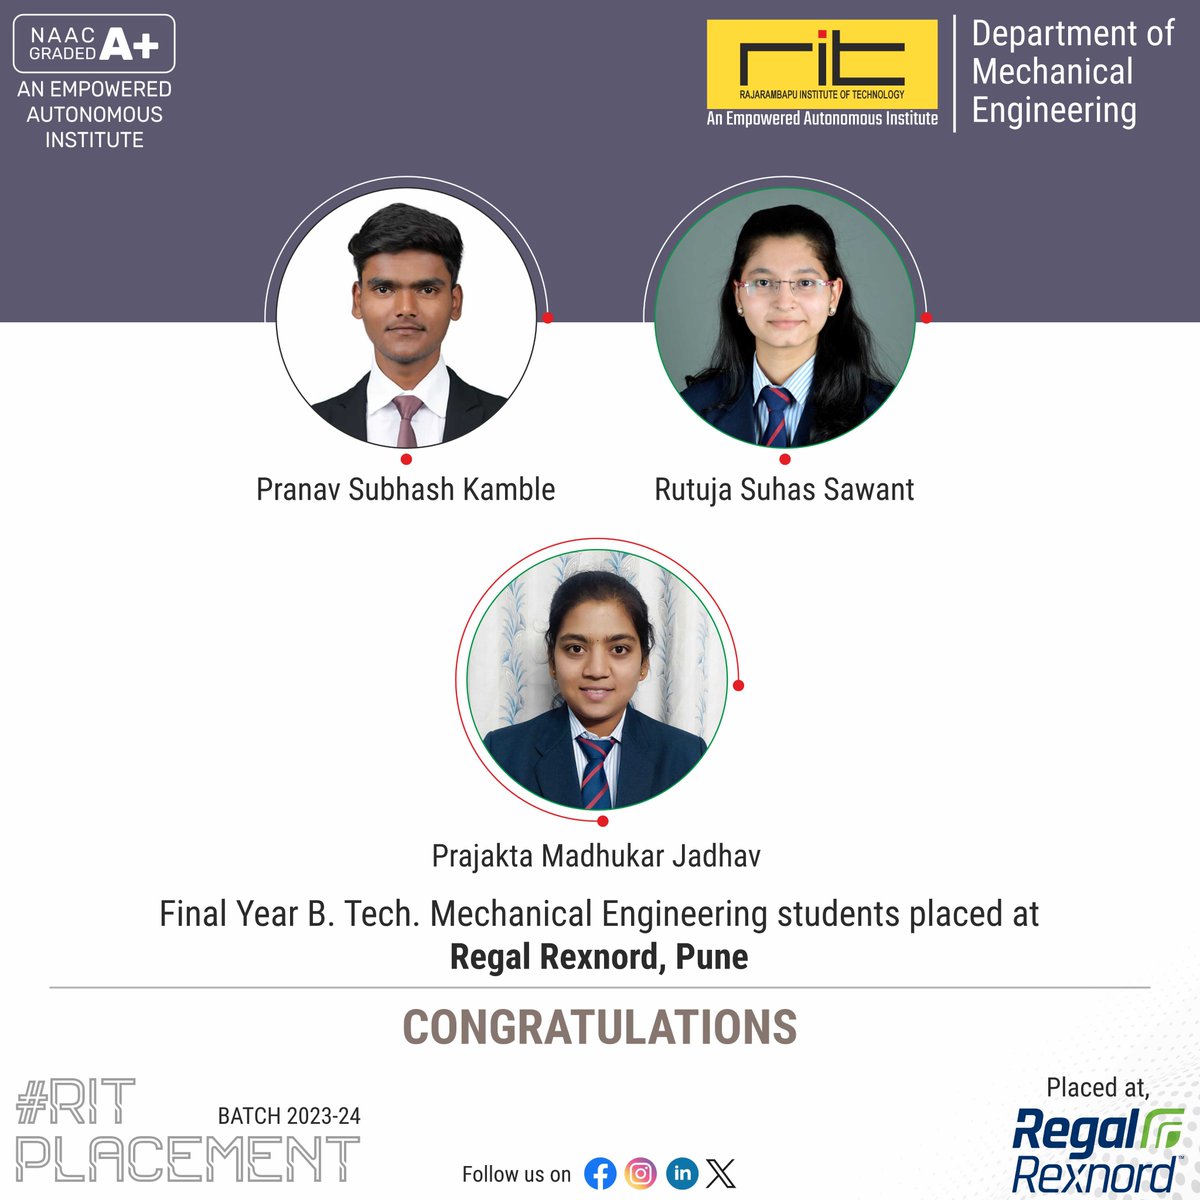 We are thrilled to announce that our talented students have been placed at Regal Rexnord, Pune! We are incredibly proud of your achievements and can't wait to see the amazing contributions you'll make in the industry.

#ProudMoment #MechanicalEngineering #CampusPlacement